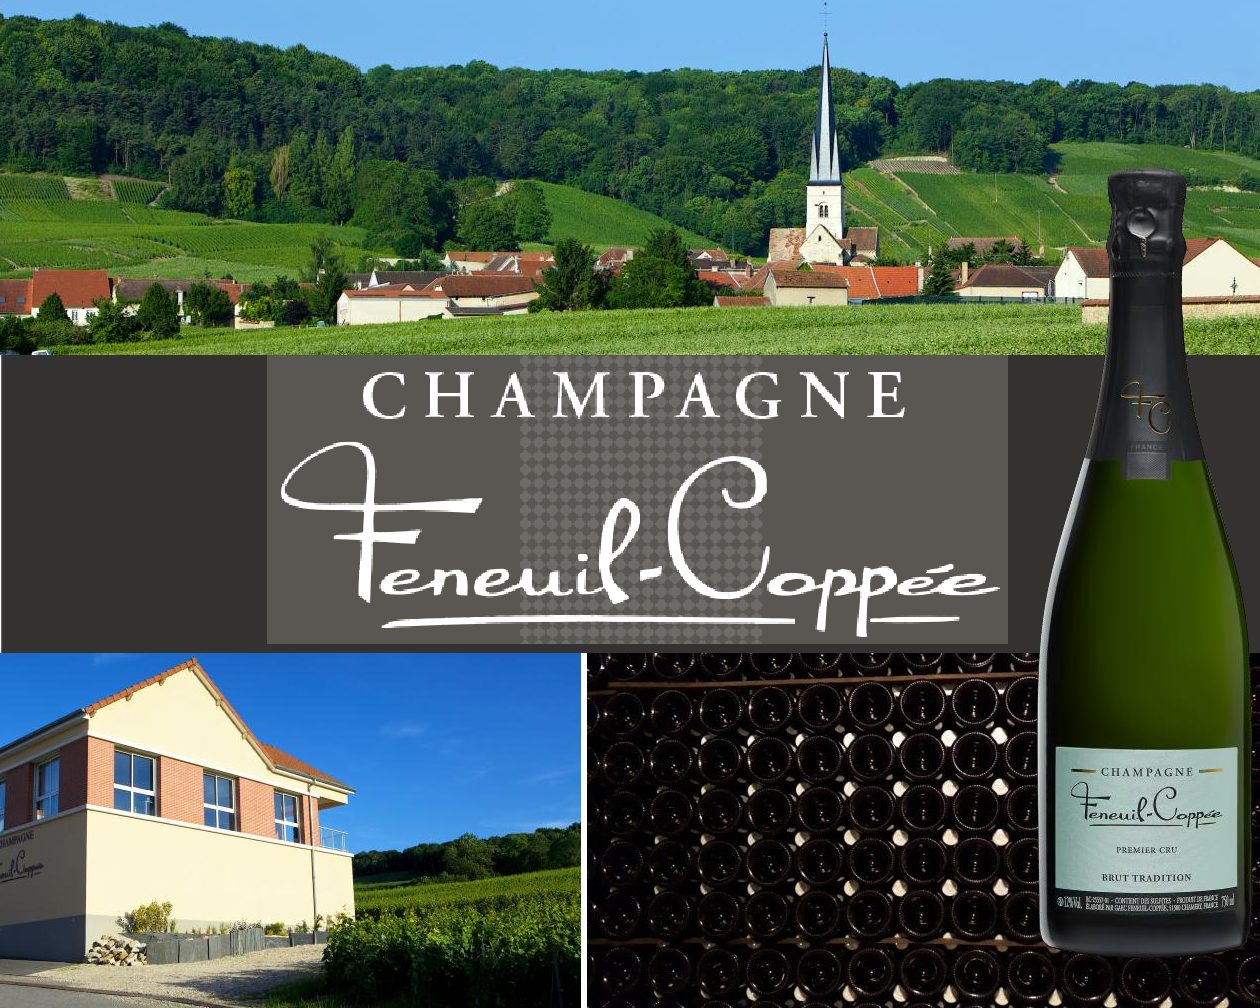 Champagne Feneuil-Coppée